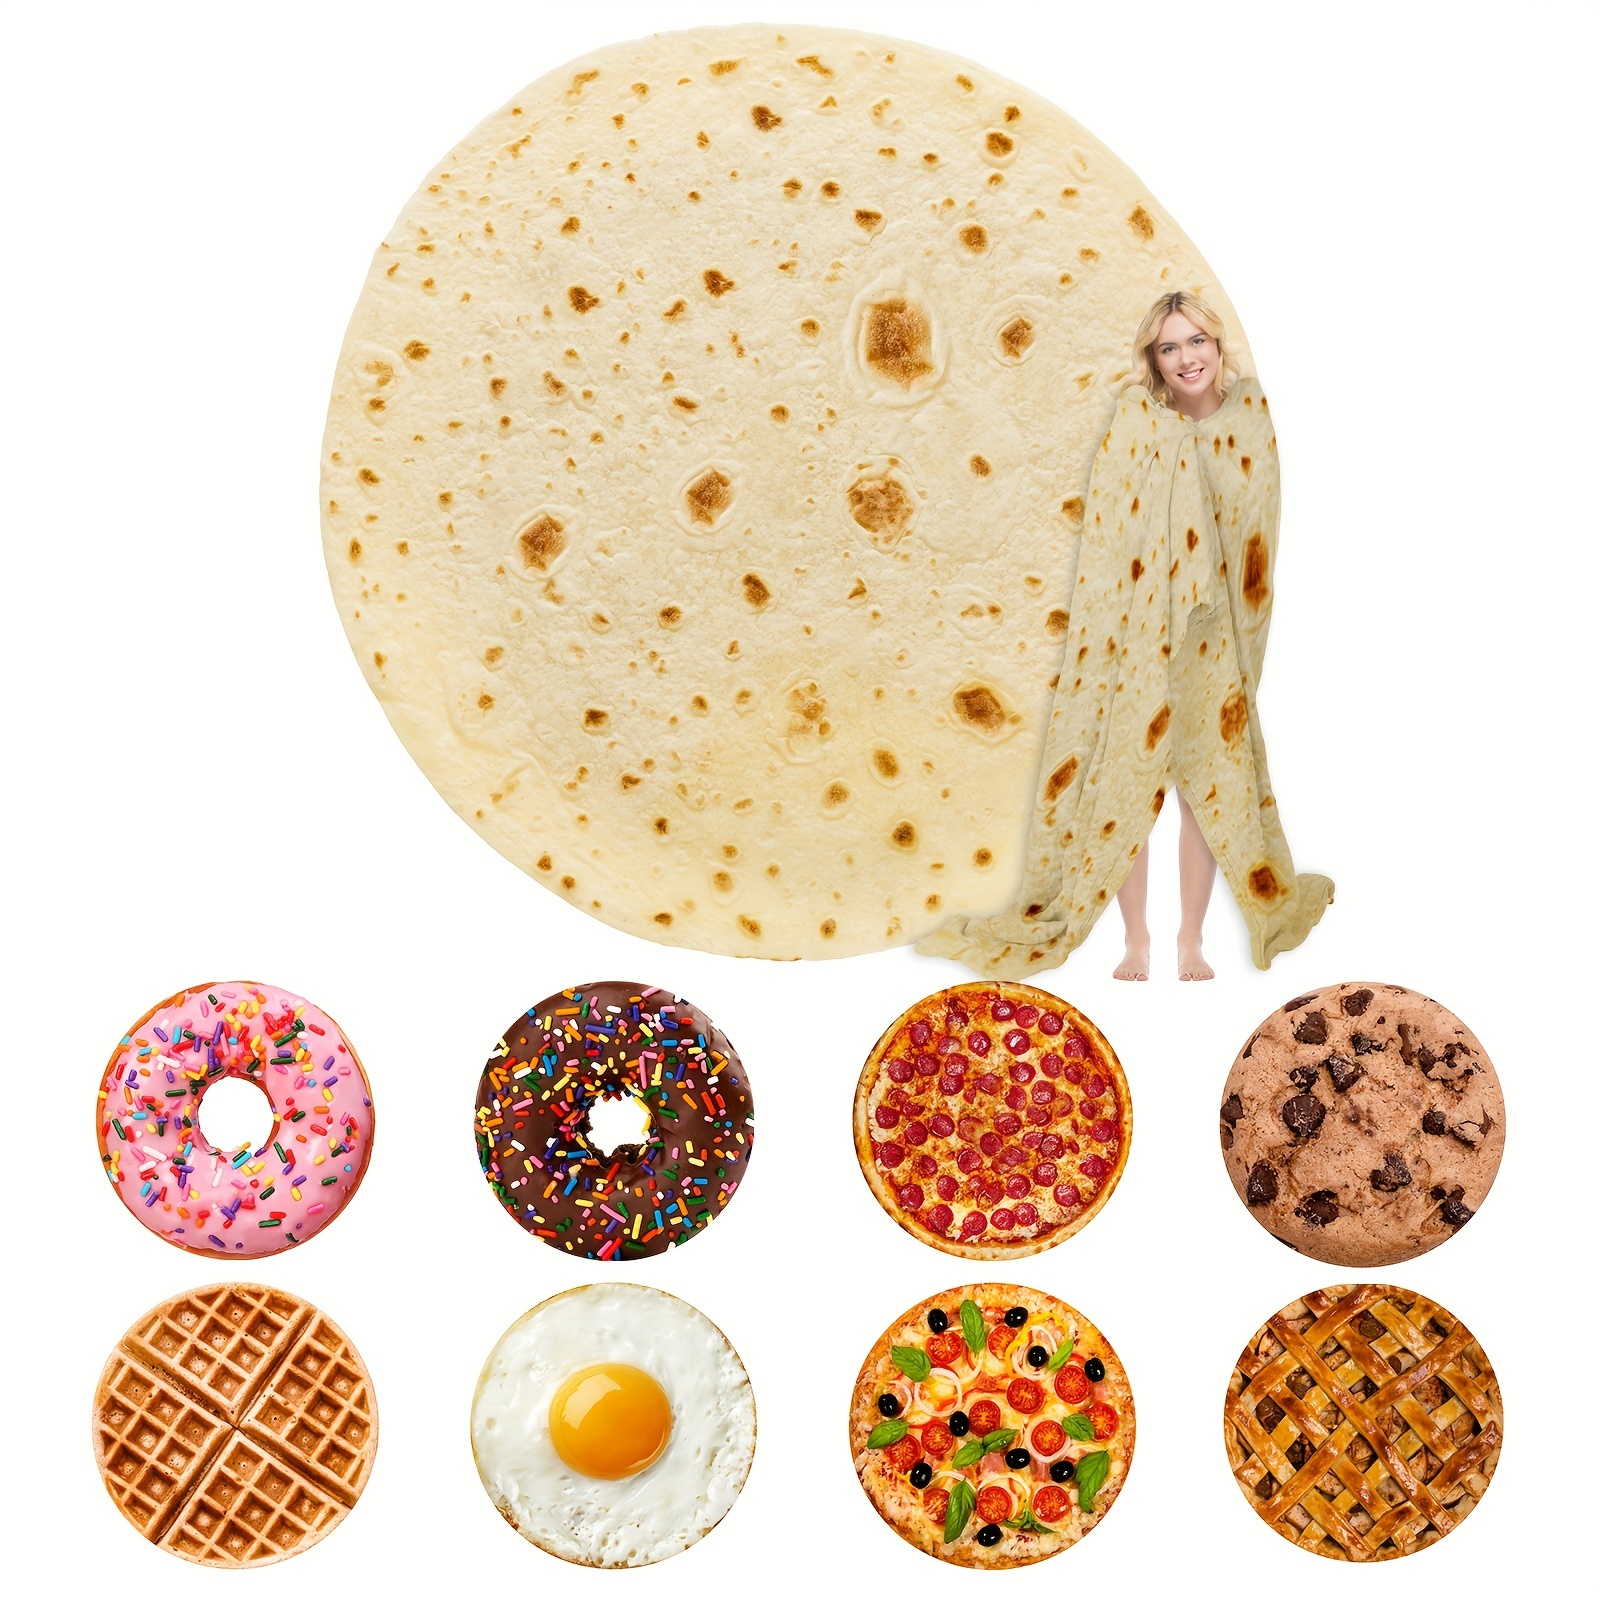 

1pc Tortilla Blanket Pepperoni Pizza Blanket Realistic Donut Blanket Food Throw Blanket, Personalized Gift Blanket, Soft And Comfortable Facecloth Round Blanket Blanket Novelty Realistic Throw Blanket